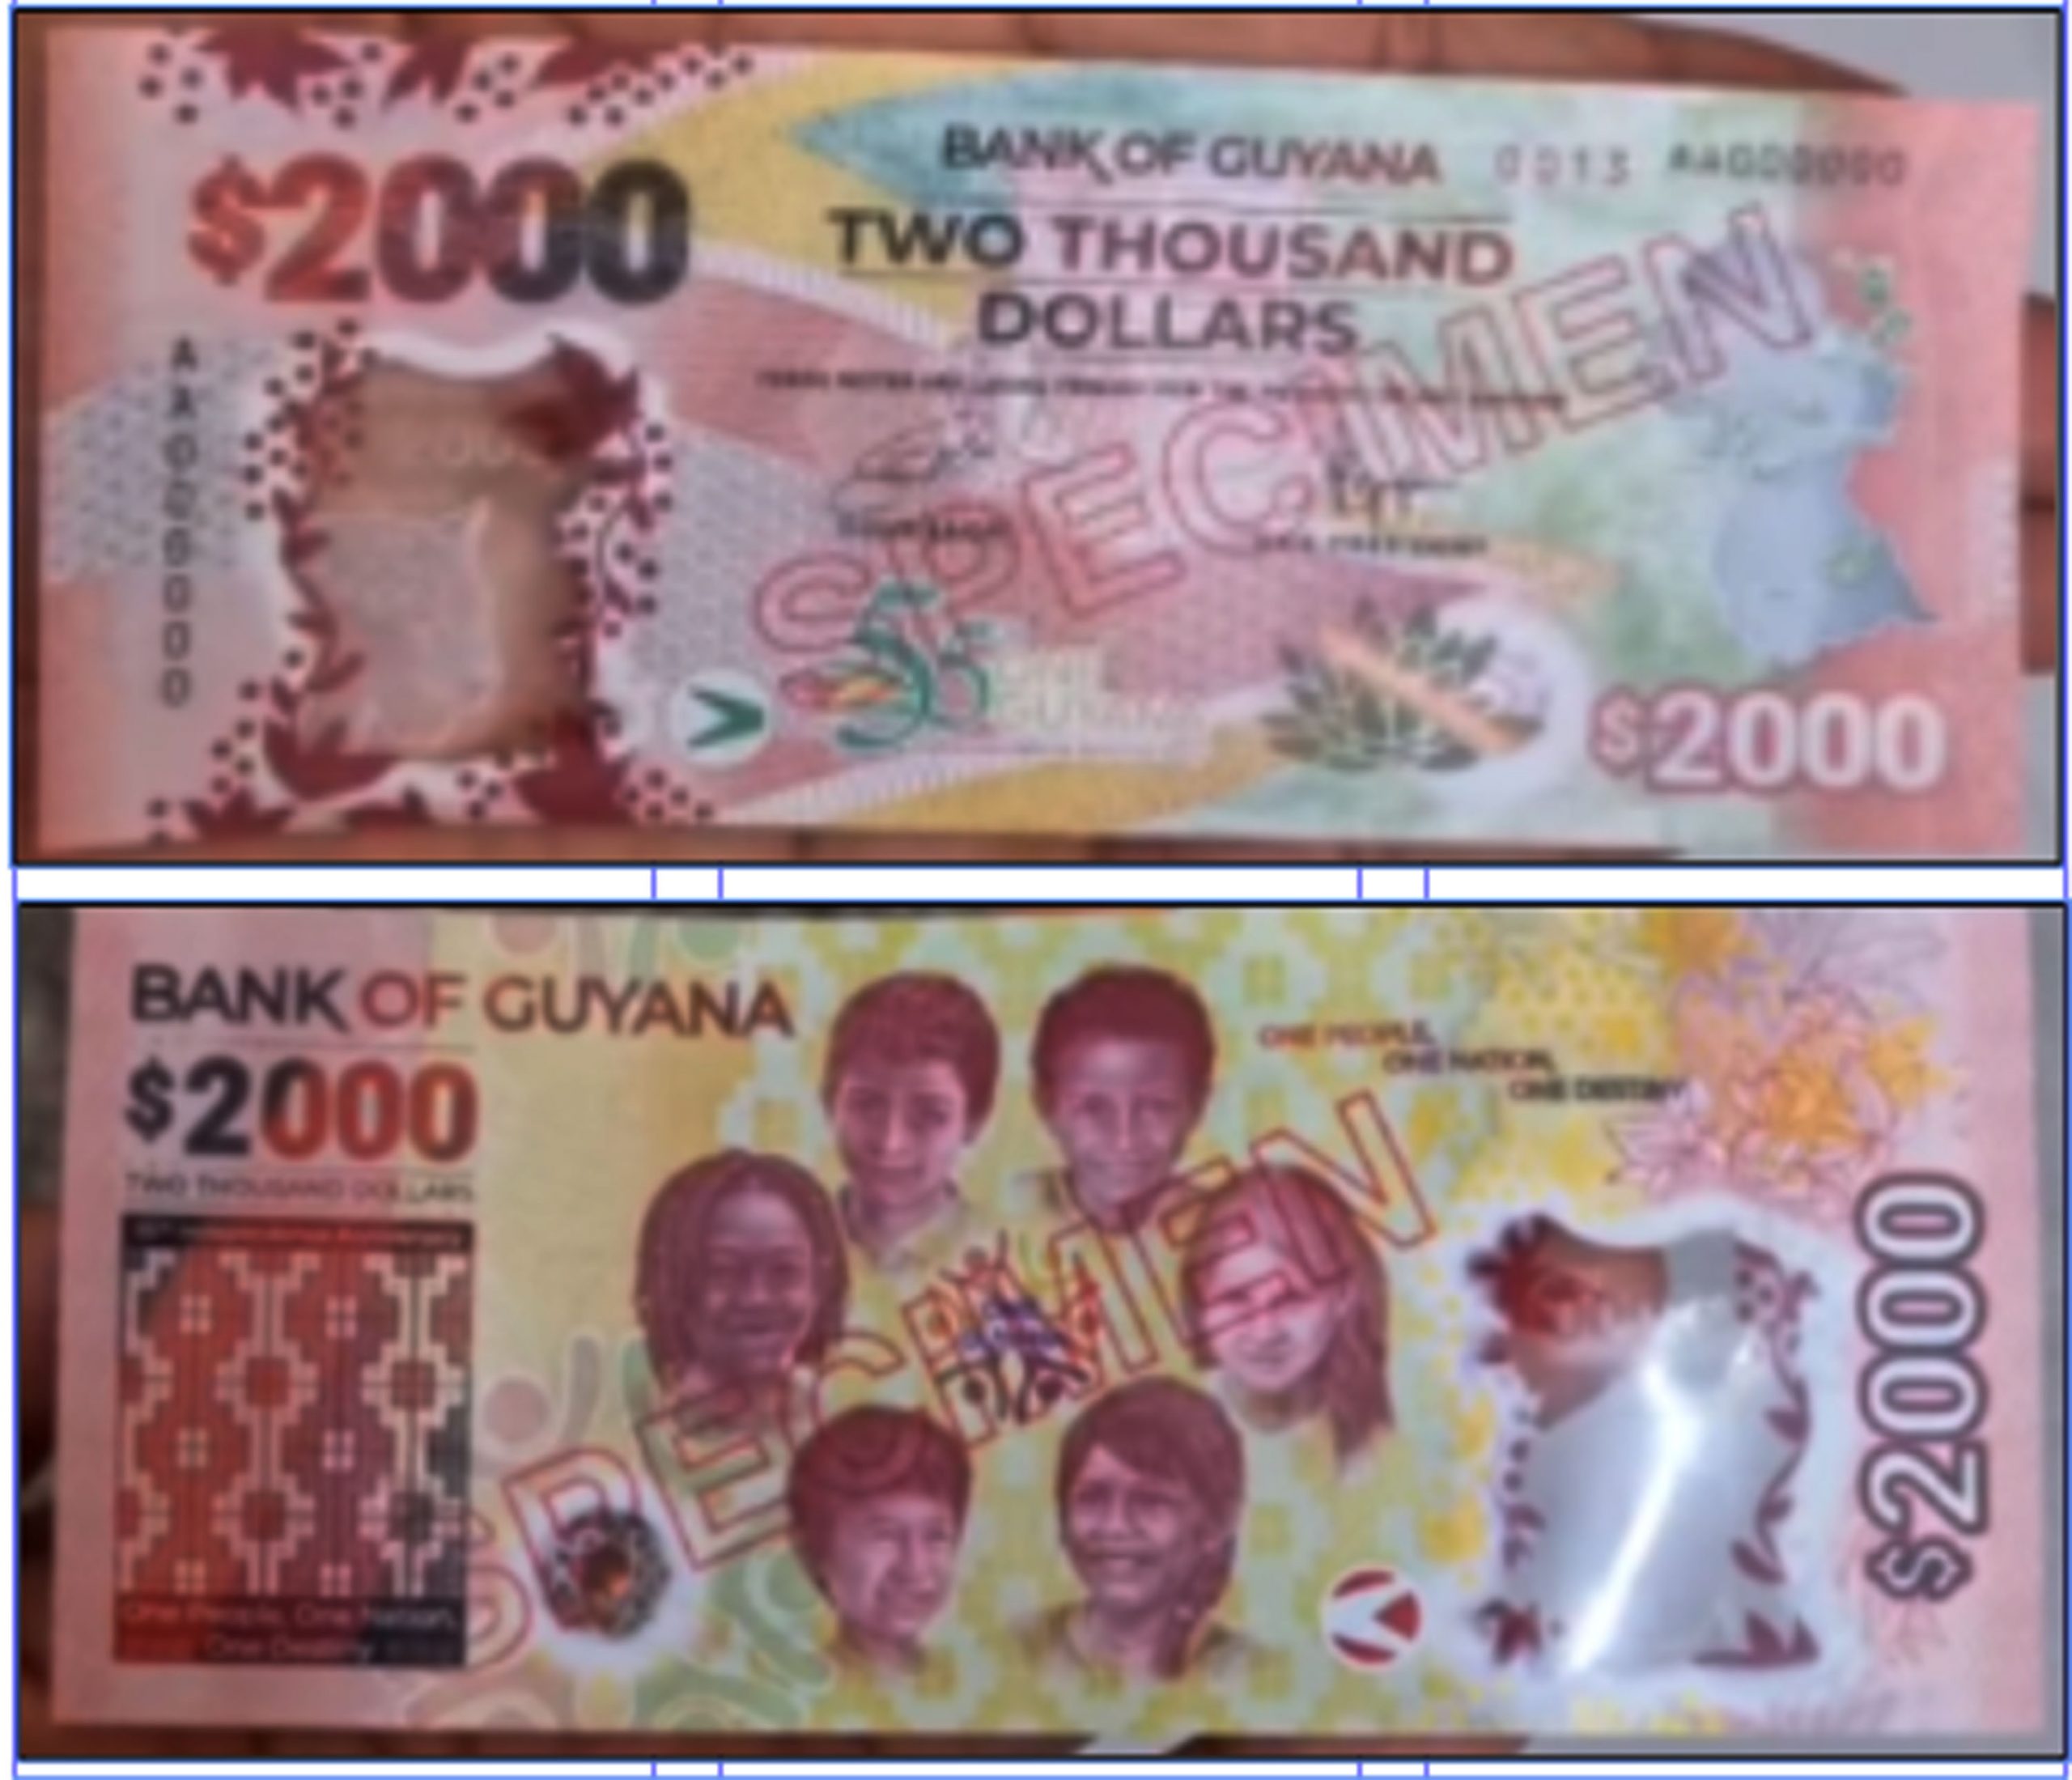 Guyana View - Who's ready for the $2000 dollar bill?